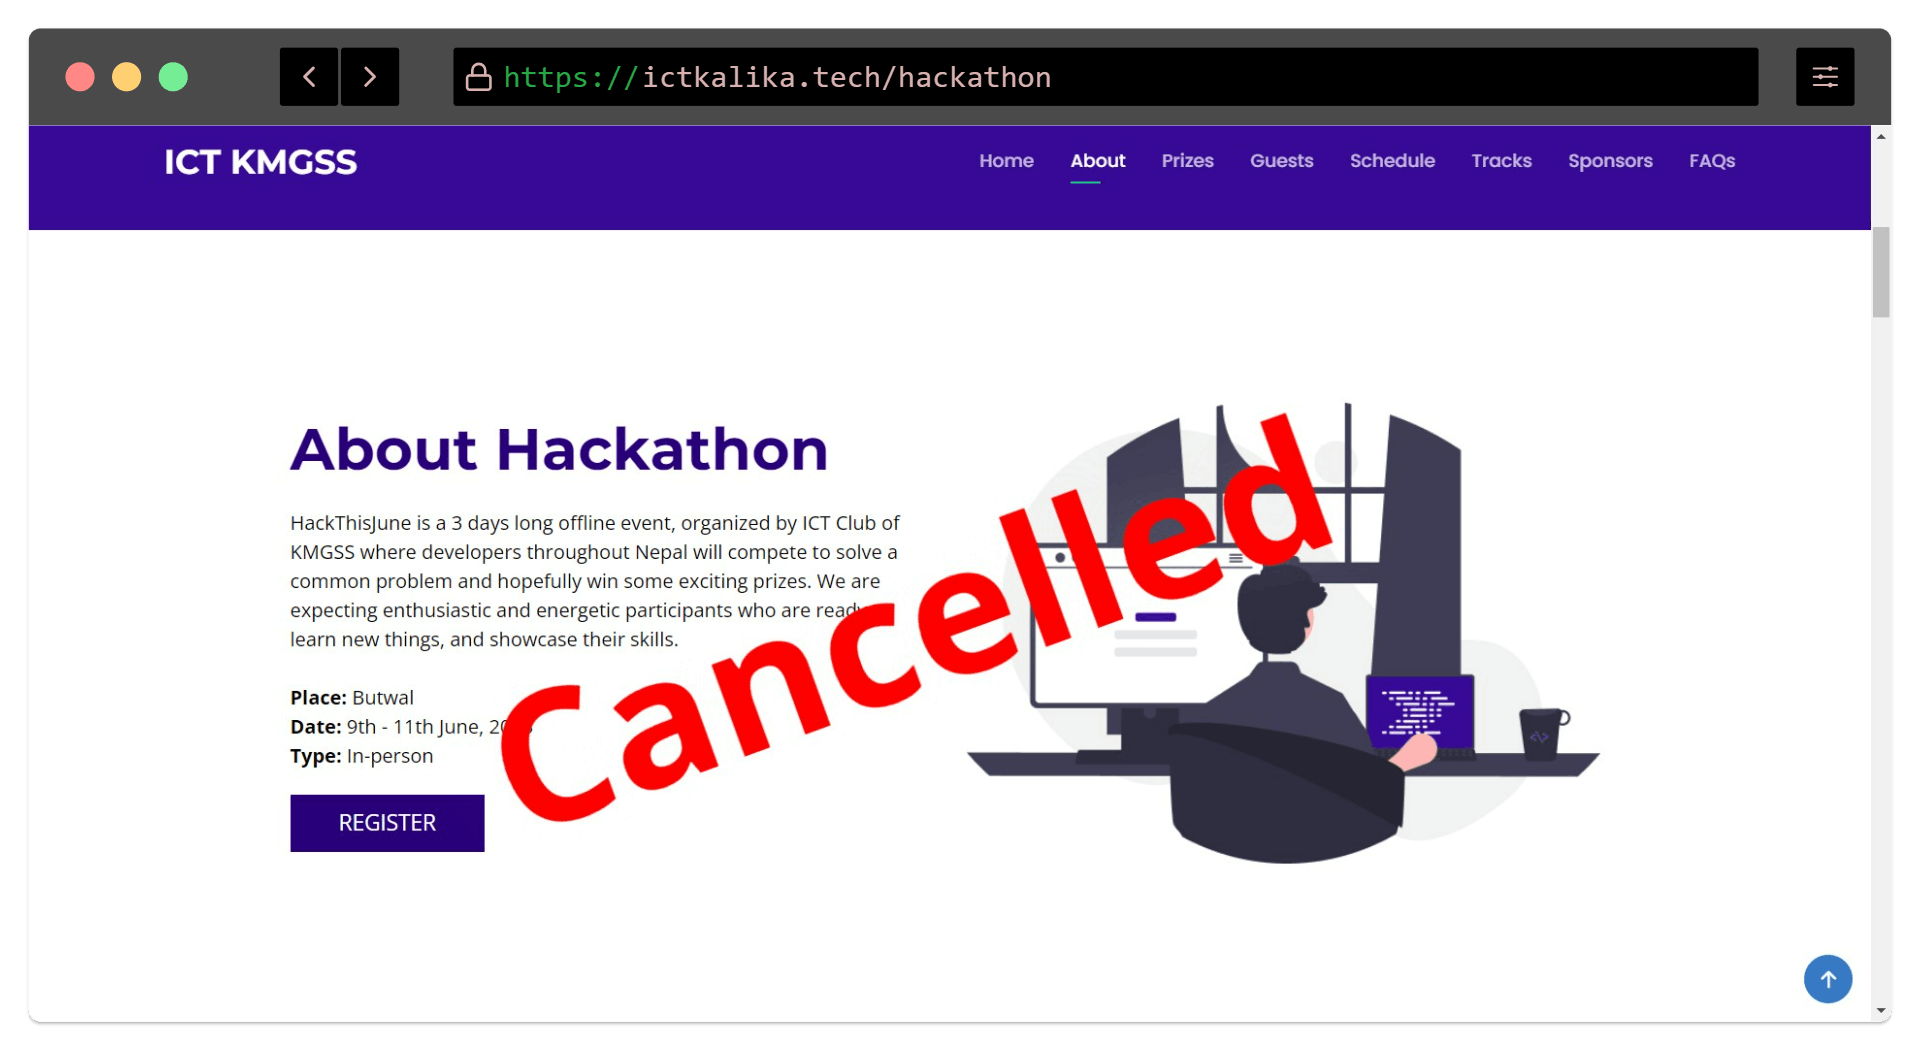 HackthisJune Hackathon by ICT club of KMGSS got cancelled